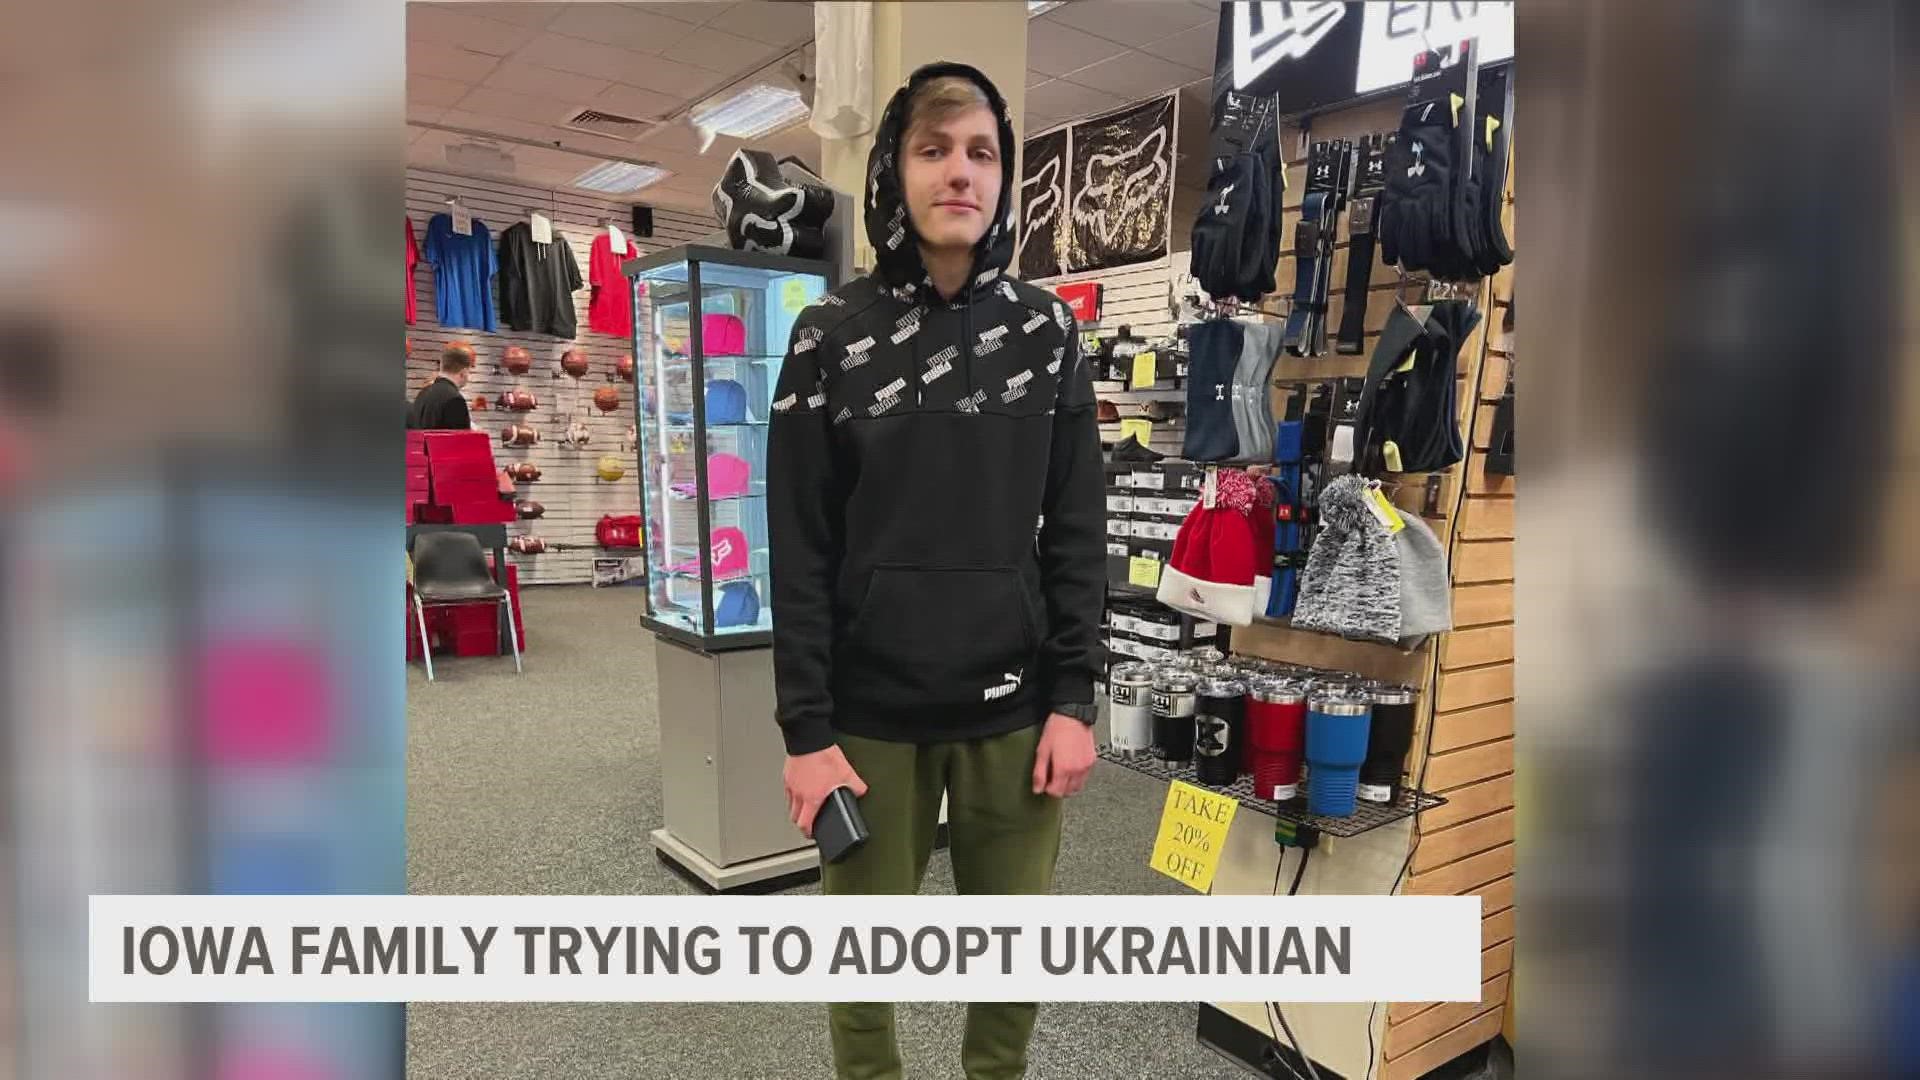 "Everything is up to the ministry there in Ukraine," Jenna Breckenridge told Local 5.